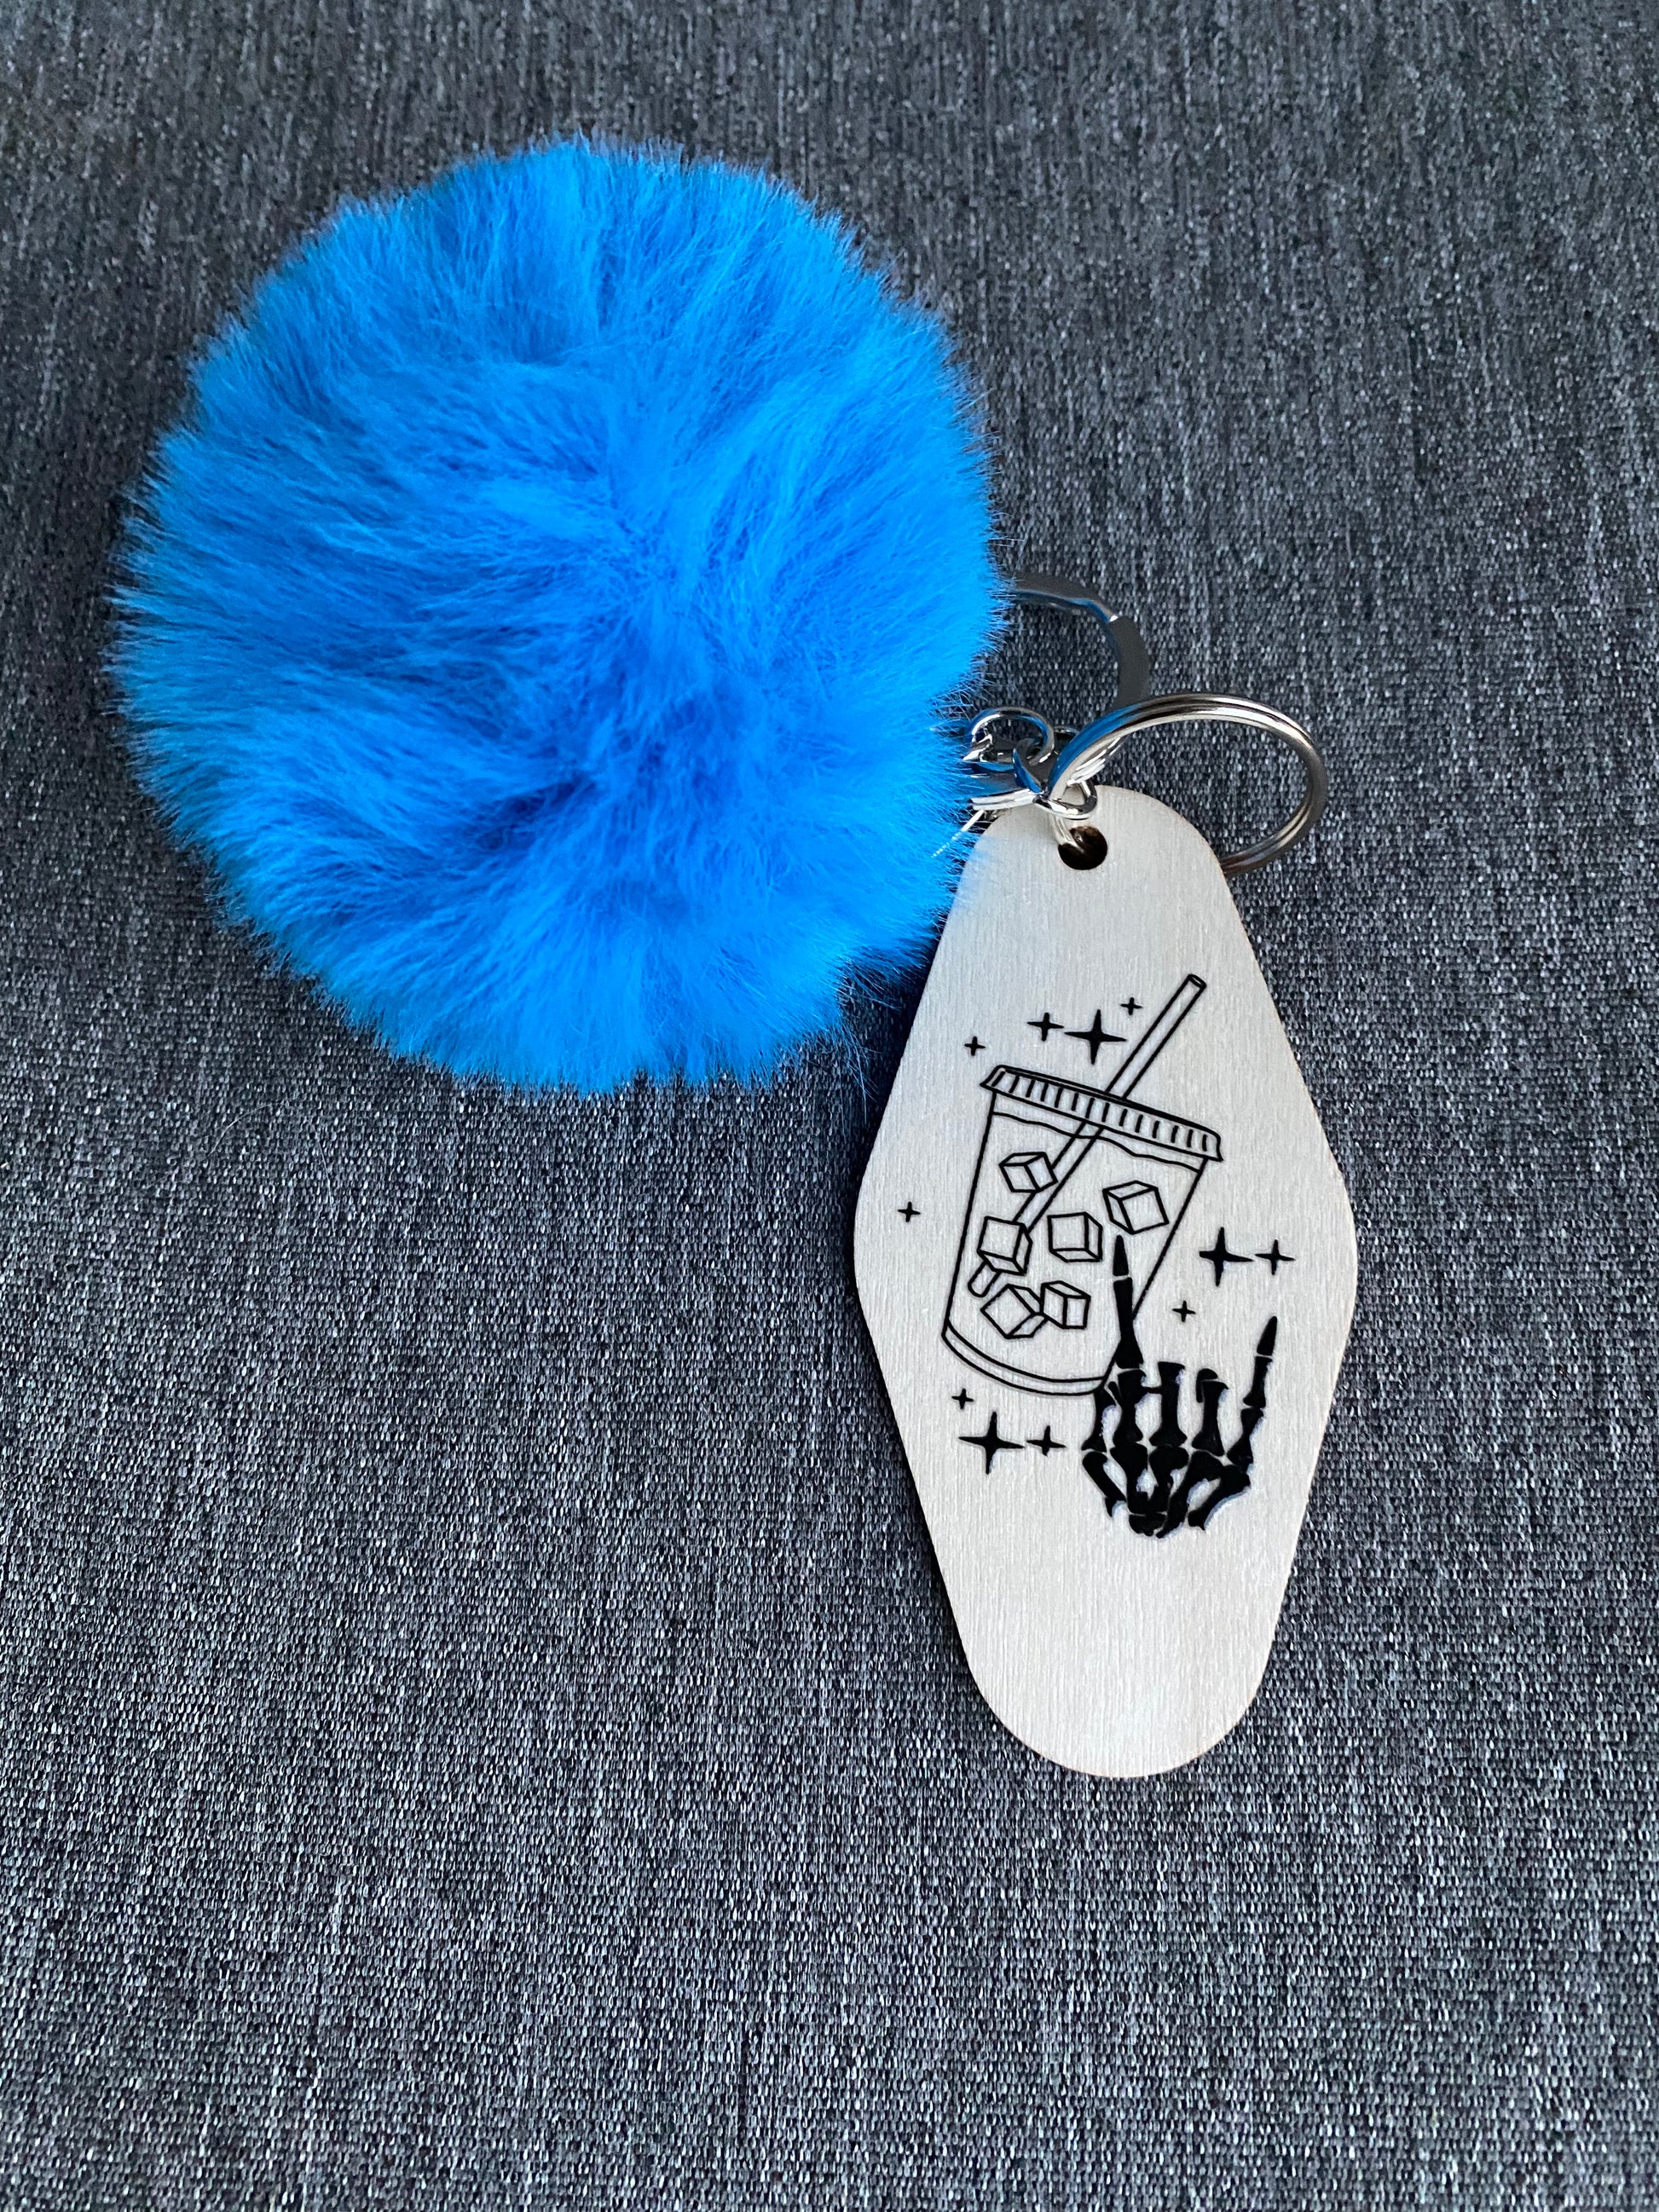 Wood keychain with an iced coffee and skeleton hand on the front. Attached to the keychain is a fuzzy ball.